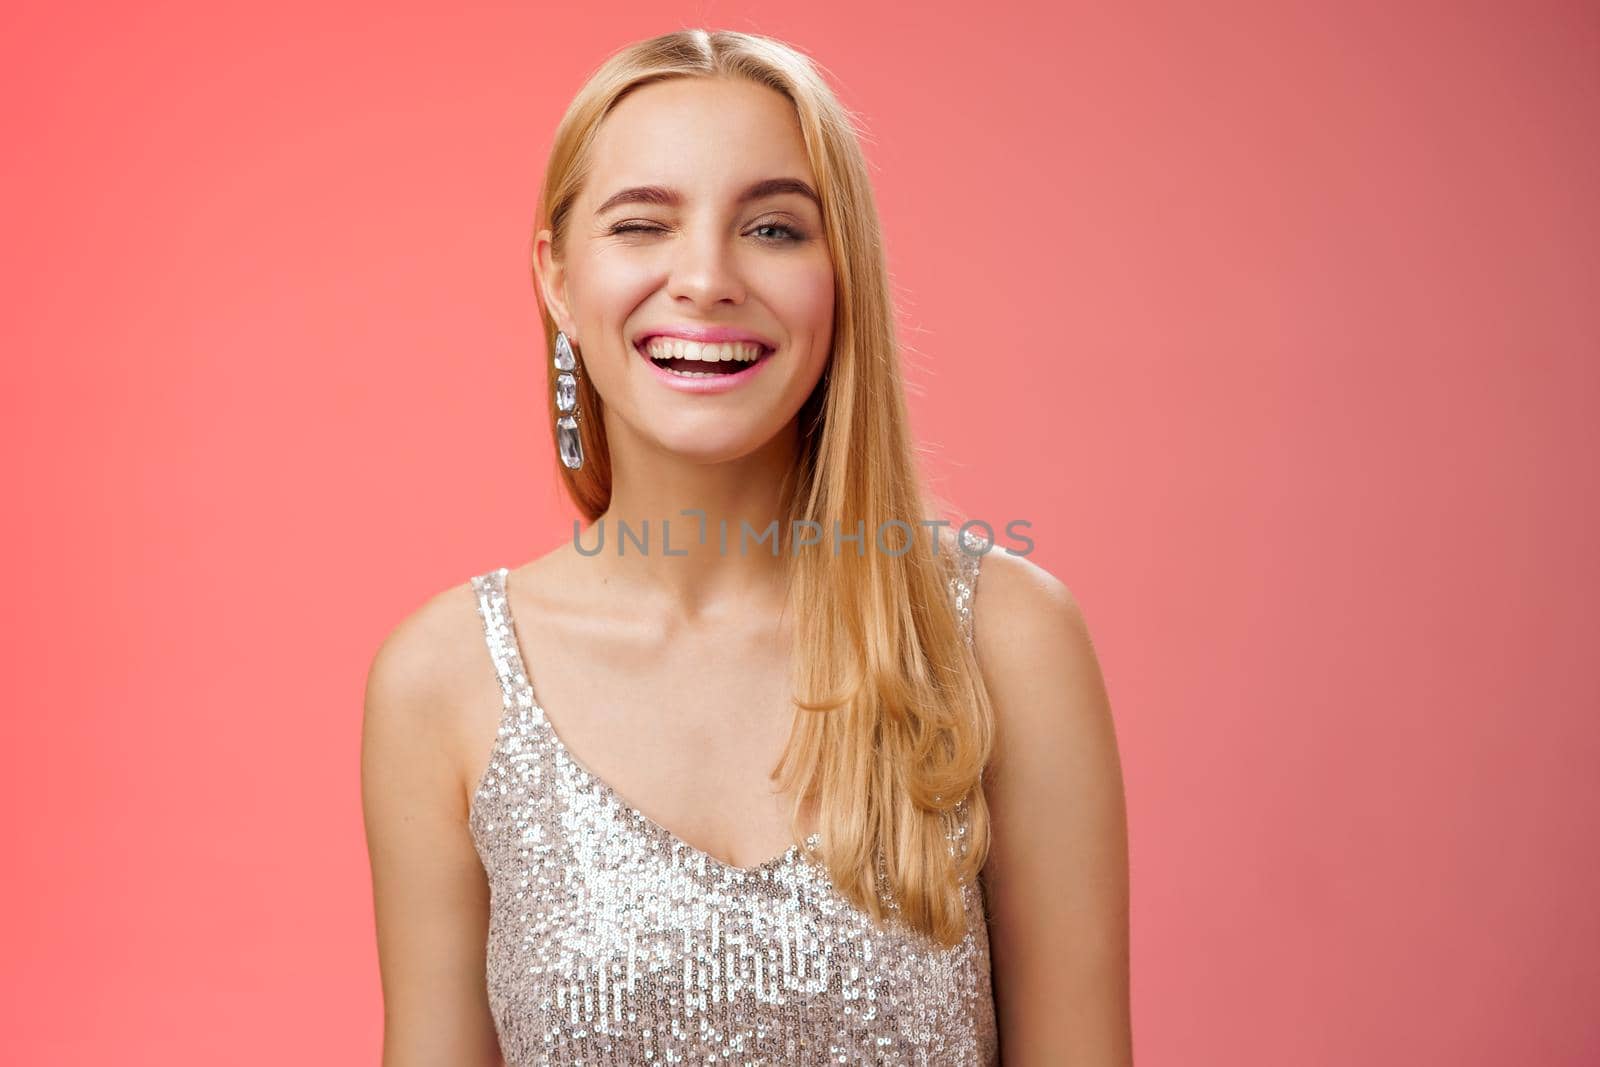 Lifestyle. Carefree joyful charming cheeky blond woman party all night long have fun smiling happily enjoying awesome evening nightclub dancing in silver stylish dress winking sassy camera red background.